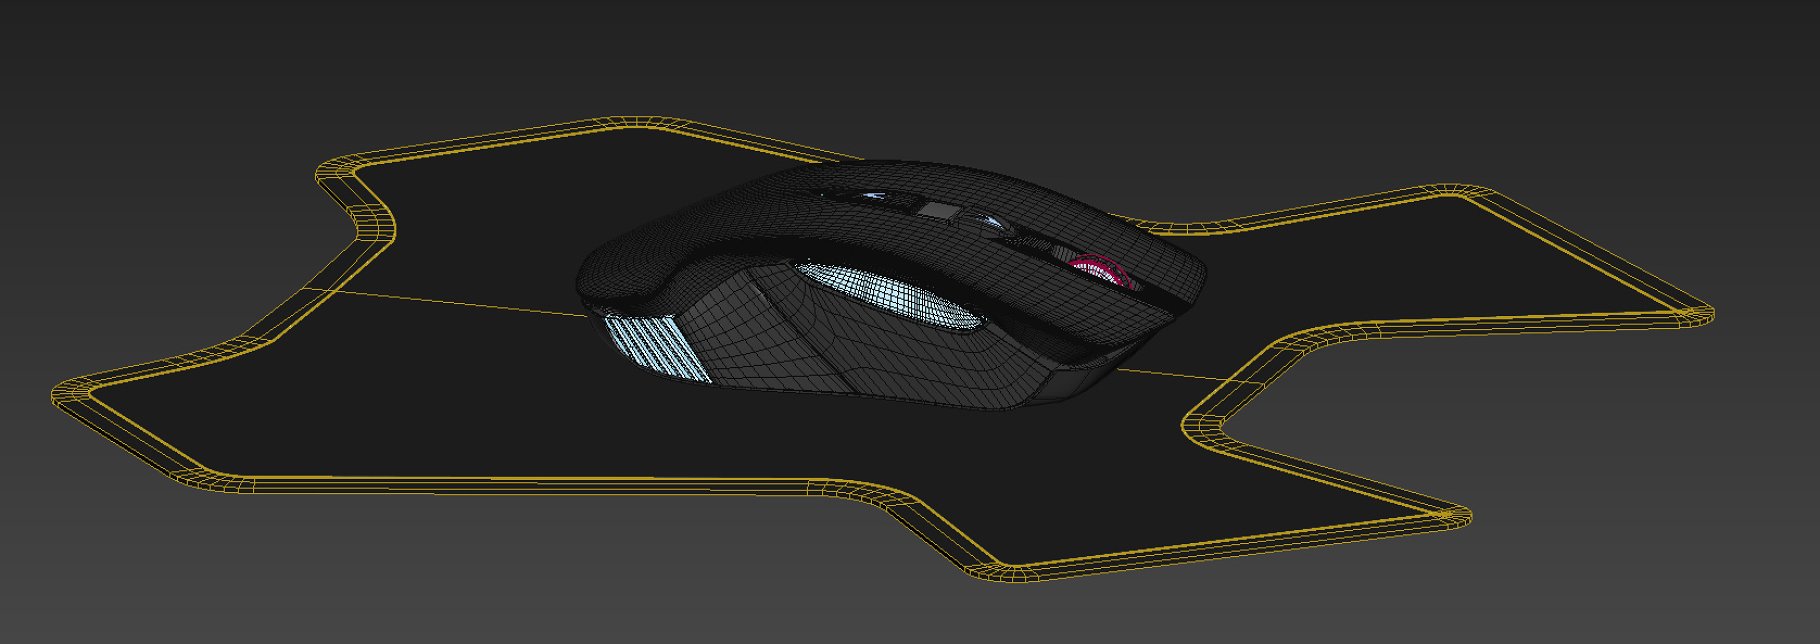 Images of an irresistible 3d model of a gaming mouse